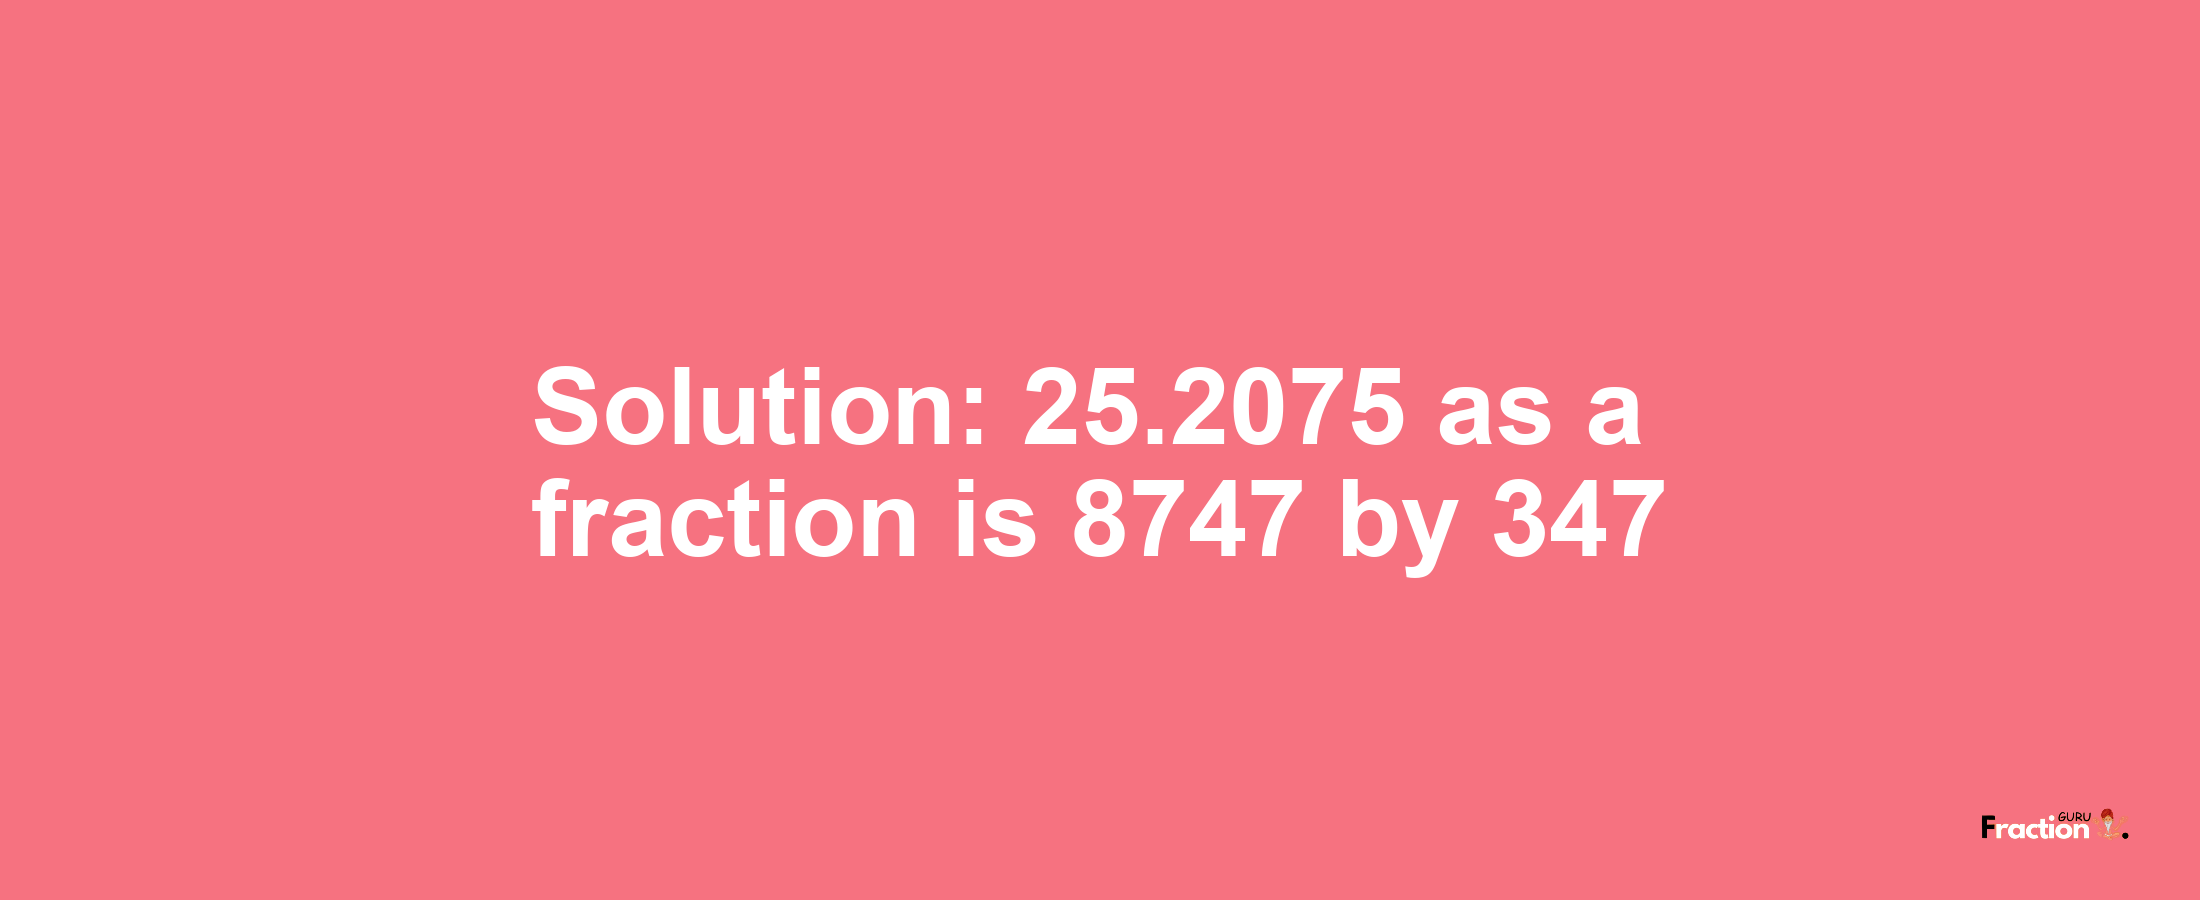 Solution:25.2075 as a fraction is 8747/347